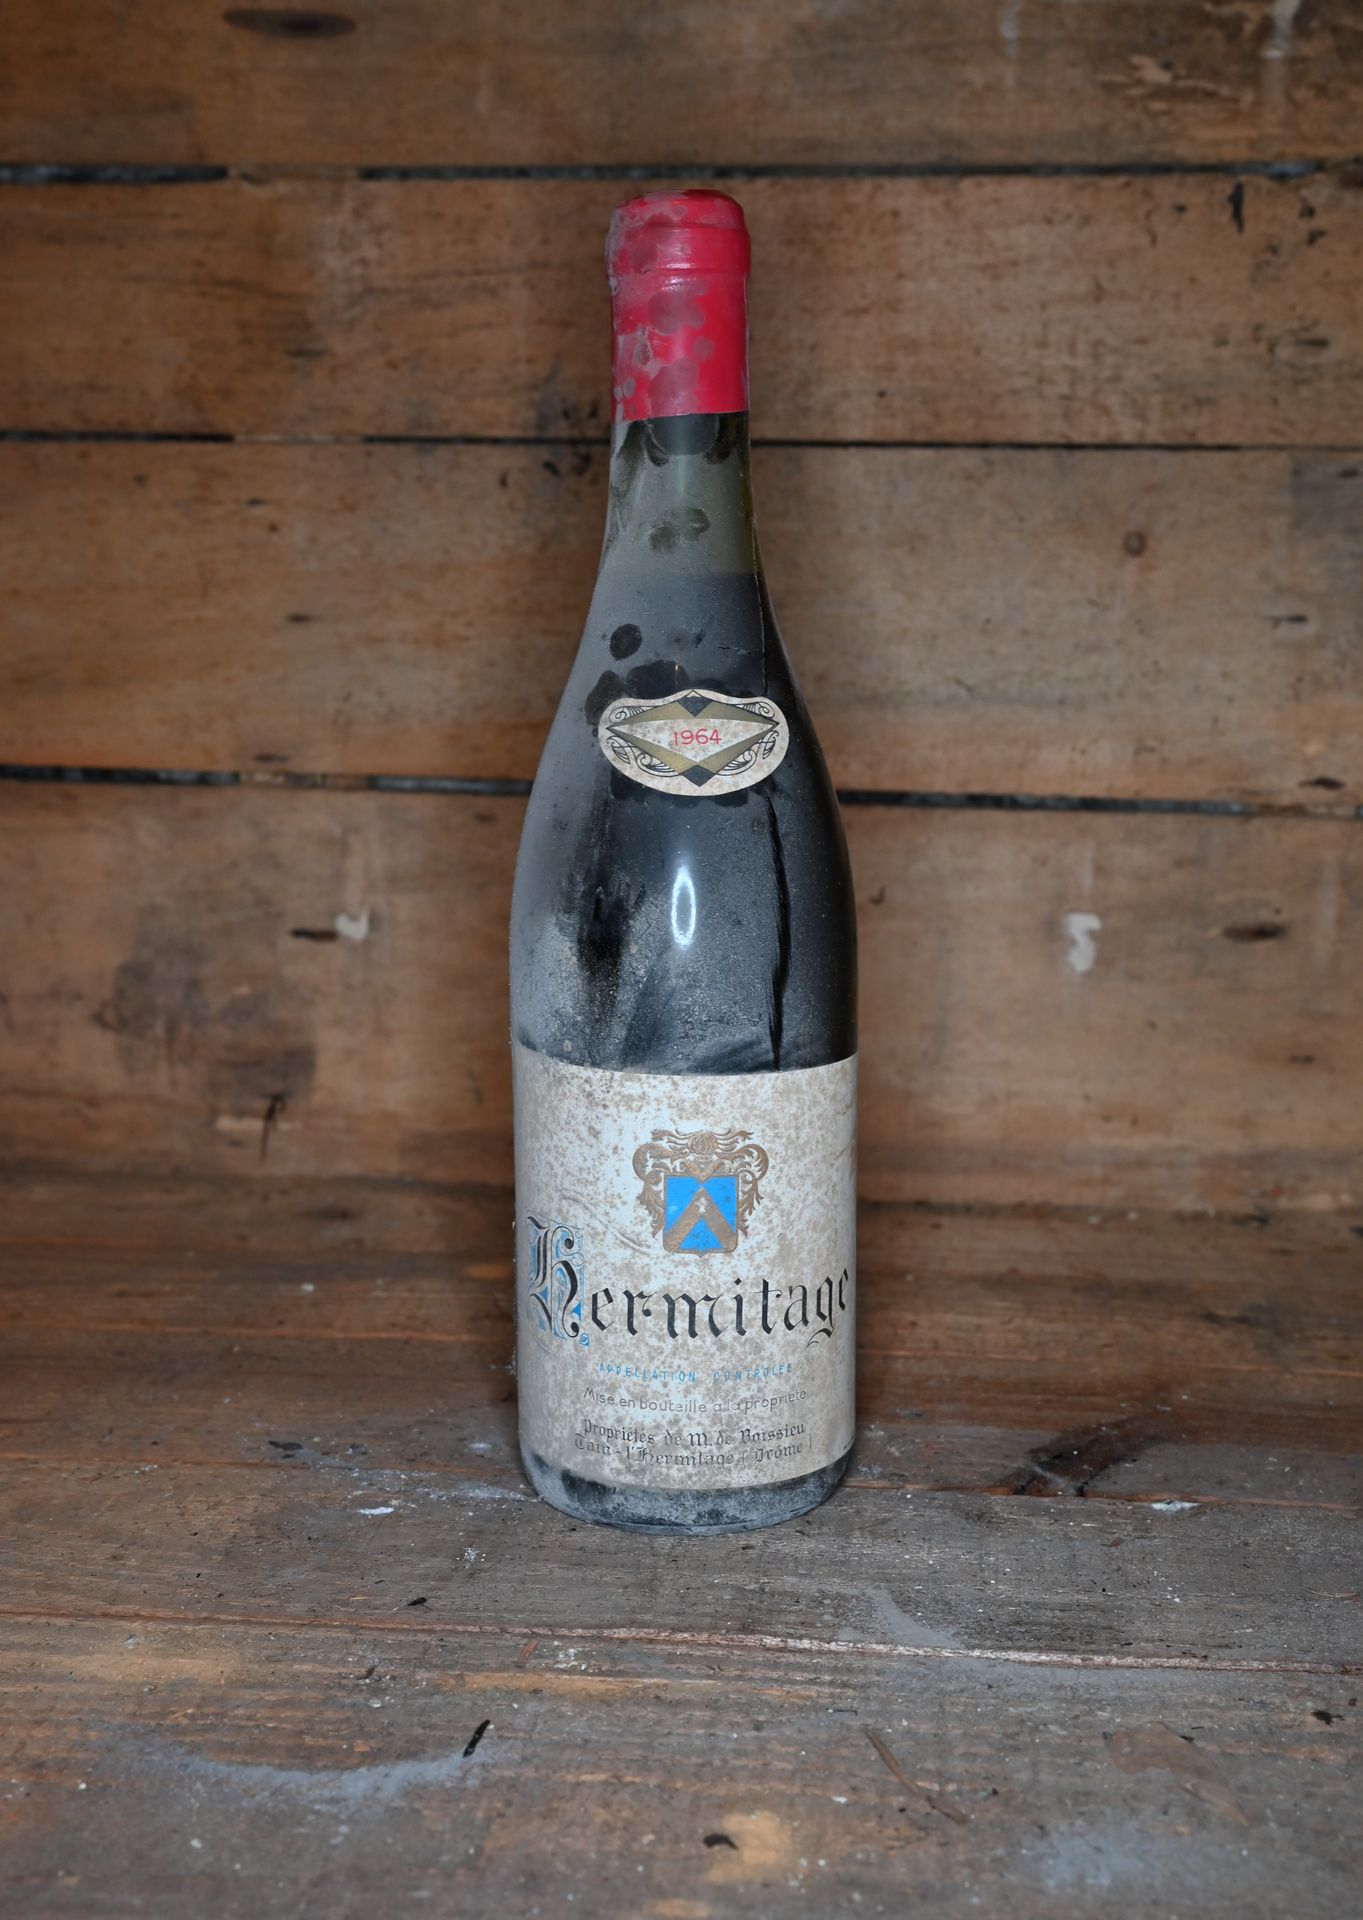 Null 12 bottles Hermitage rouge Marquis de Buissieu 1964. 

The condition of the&hellip;